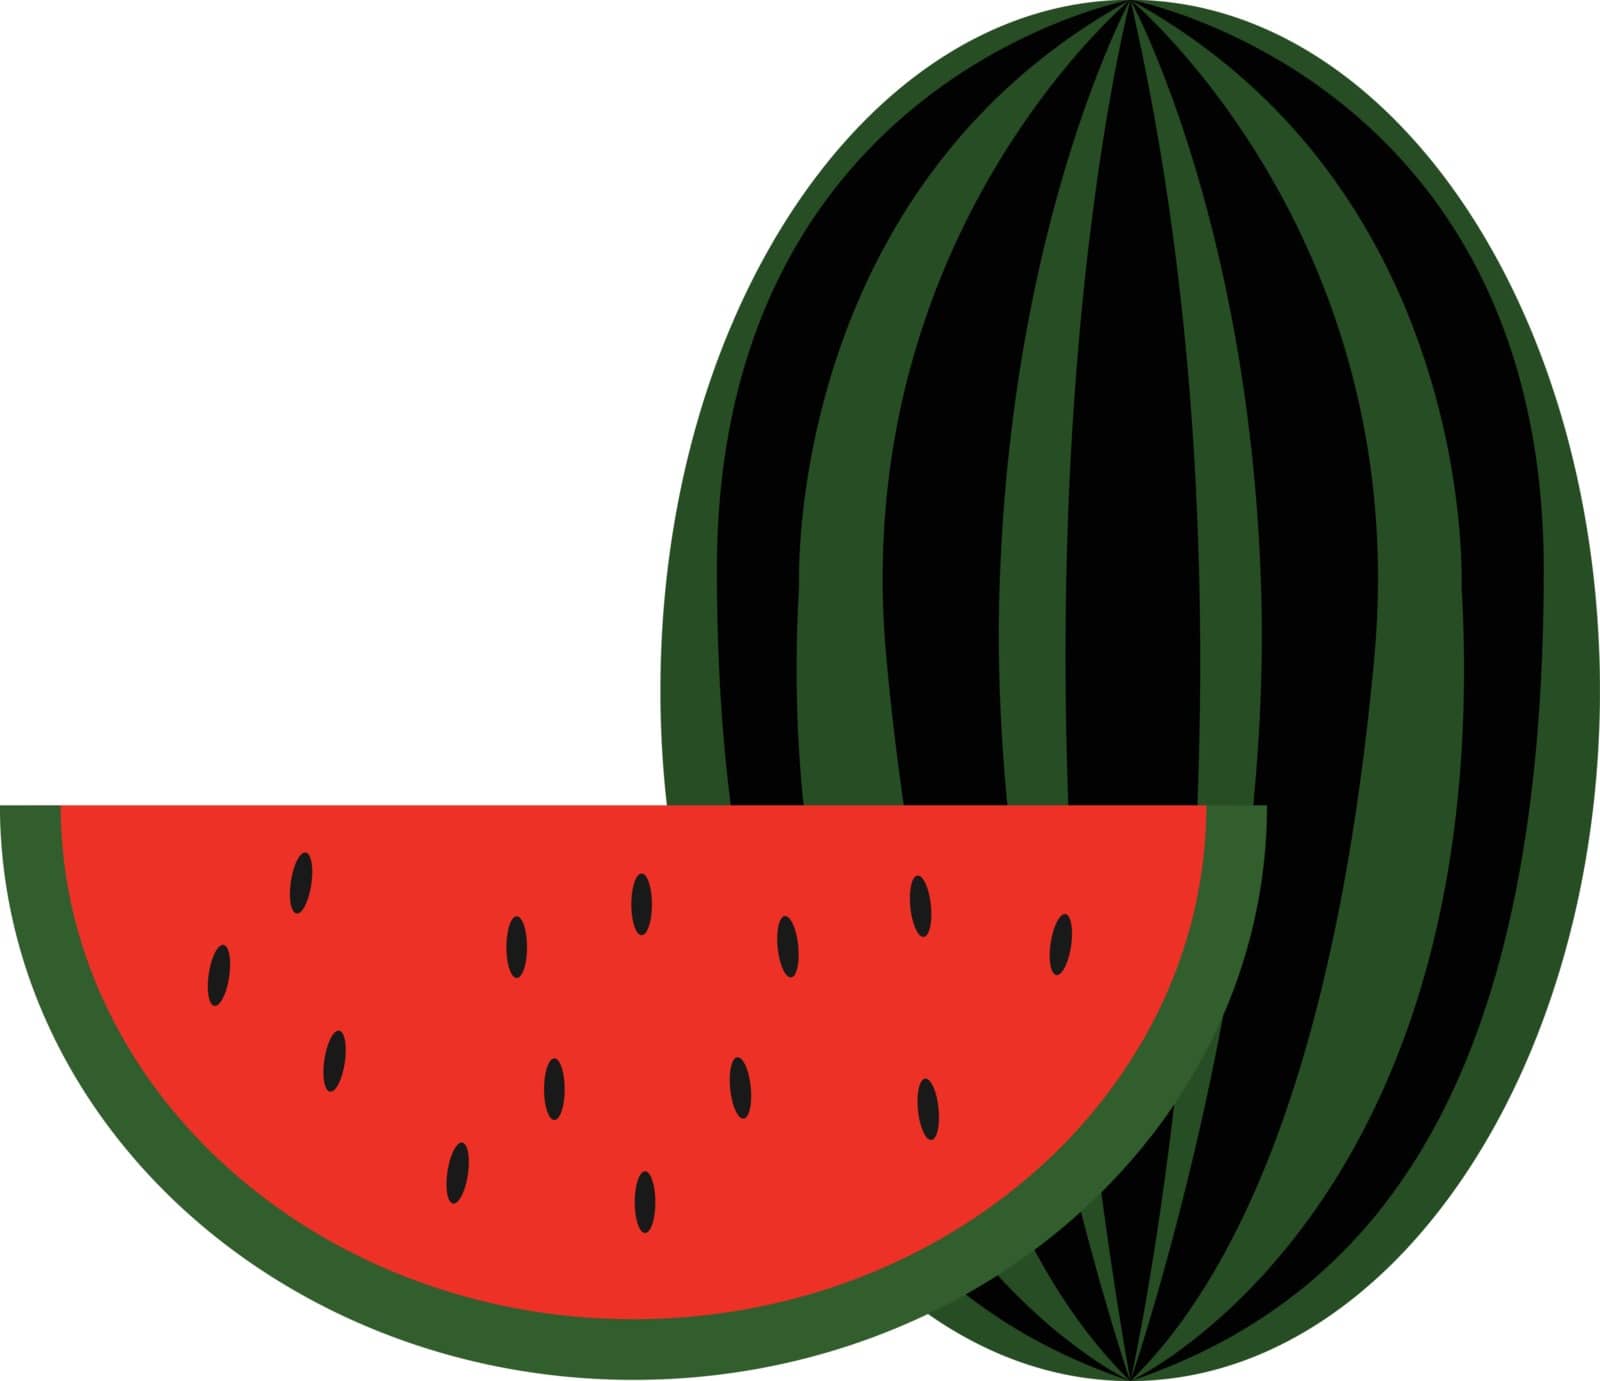 Clipart of a big watermelon and a slice of it with smooth green skin  red pulp  watery juice and black seeds exposed  vector  color drawing or illustration